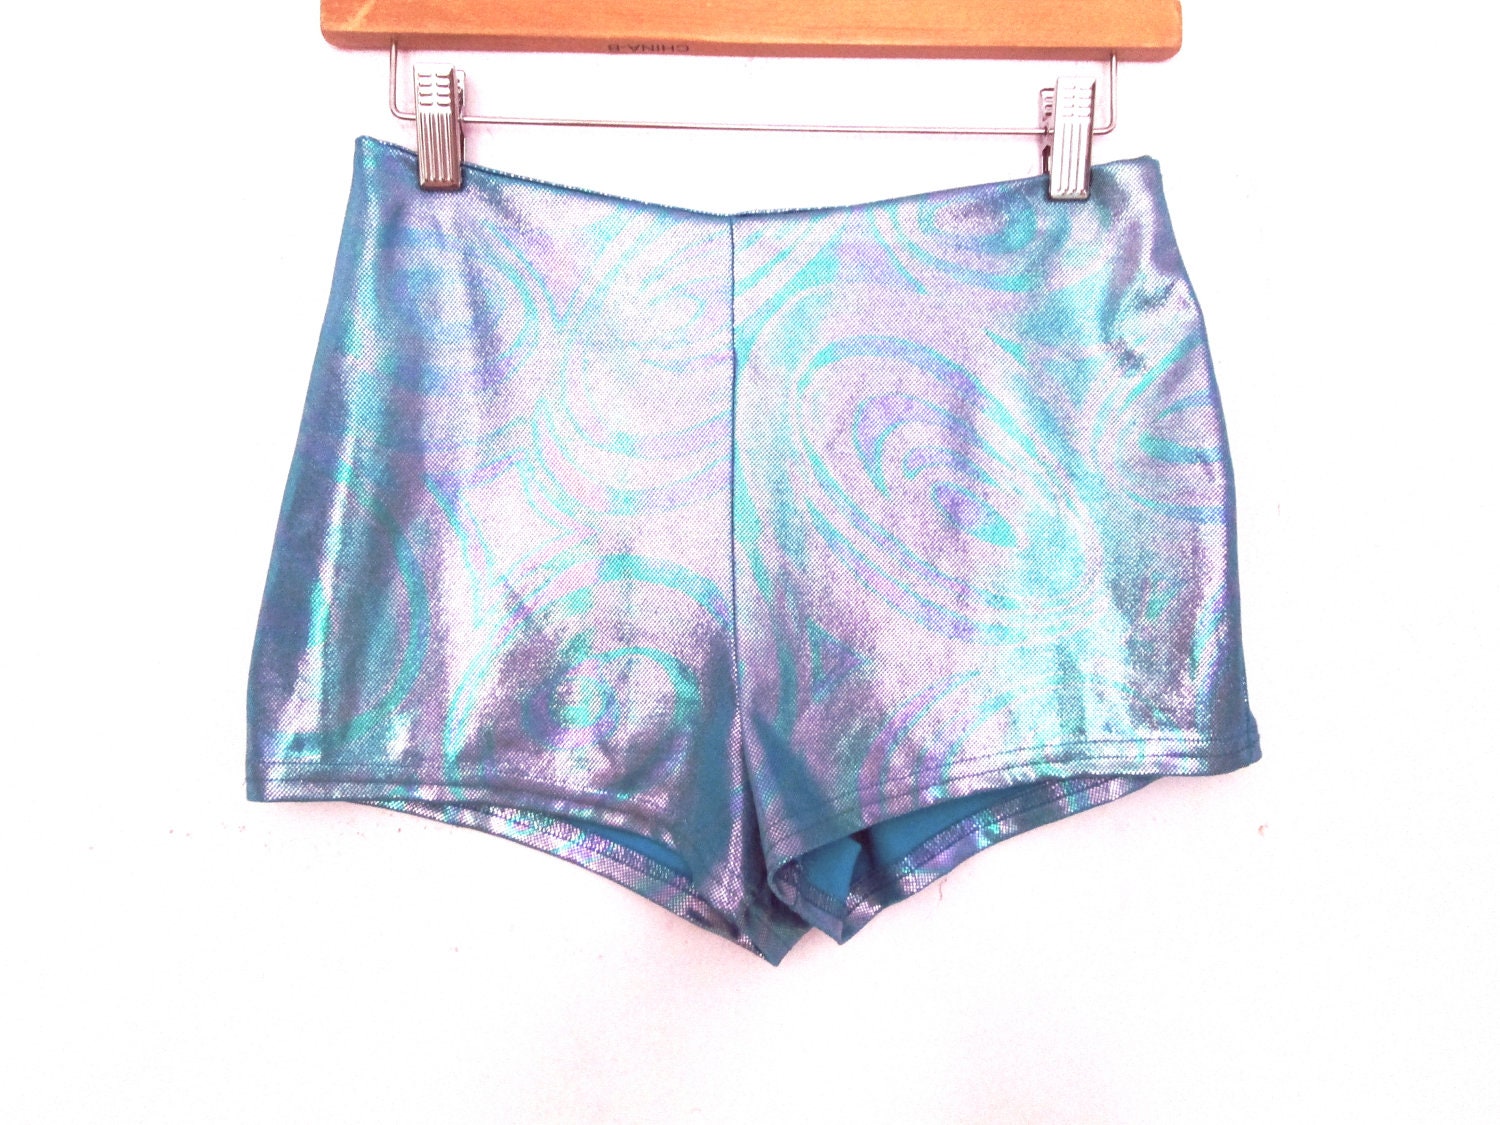 90's High Rise Iridescent Colorful Hot Pants size - M/L